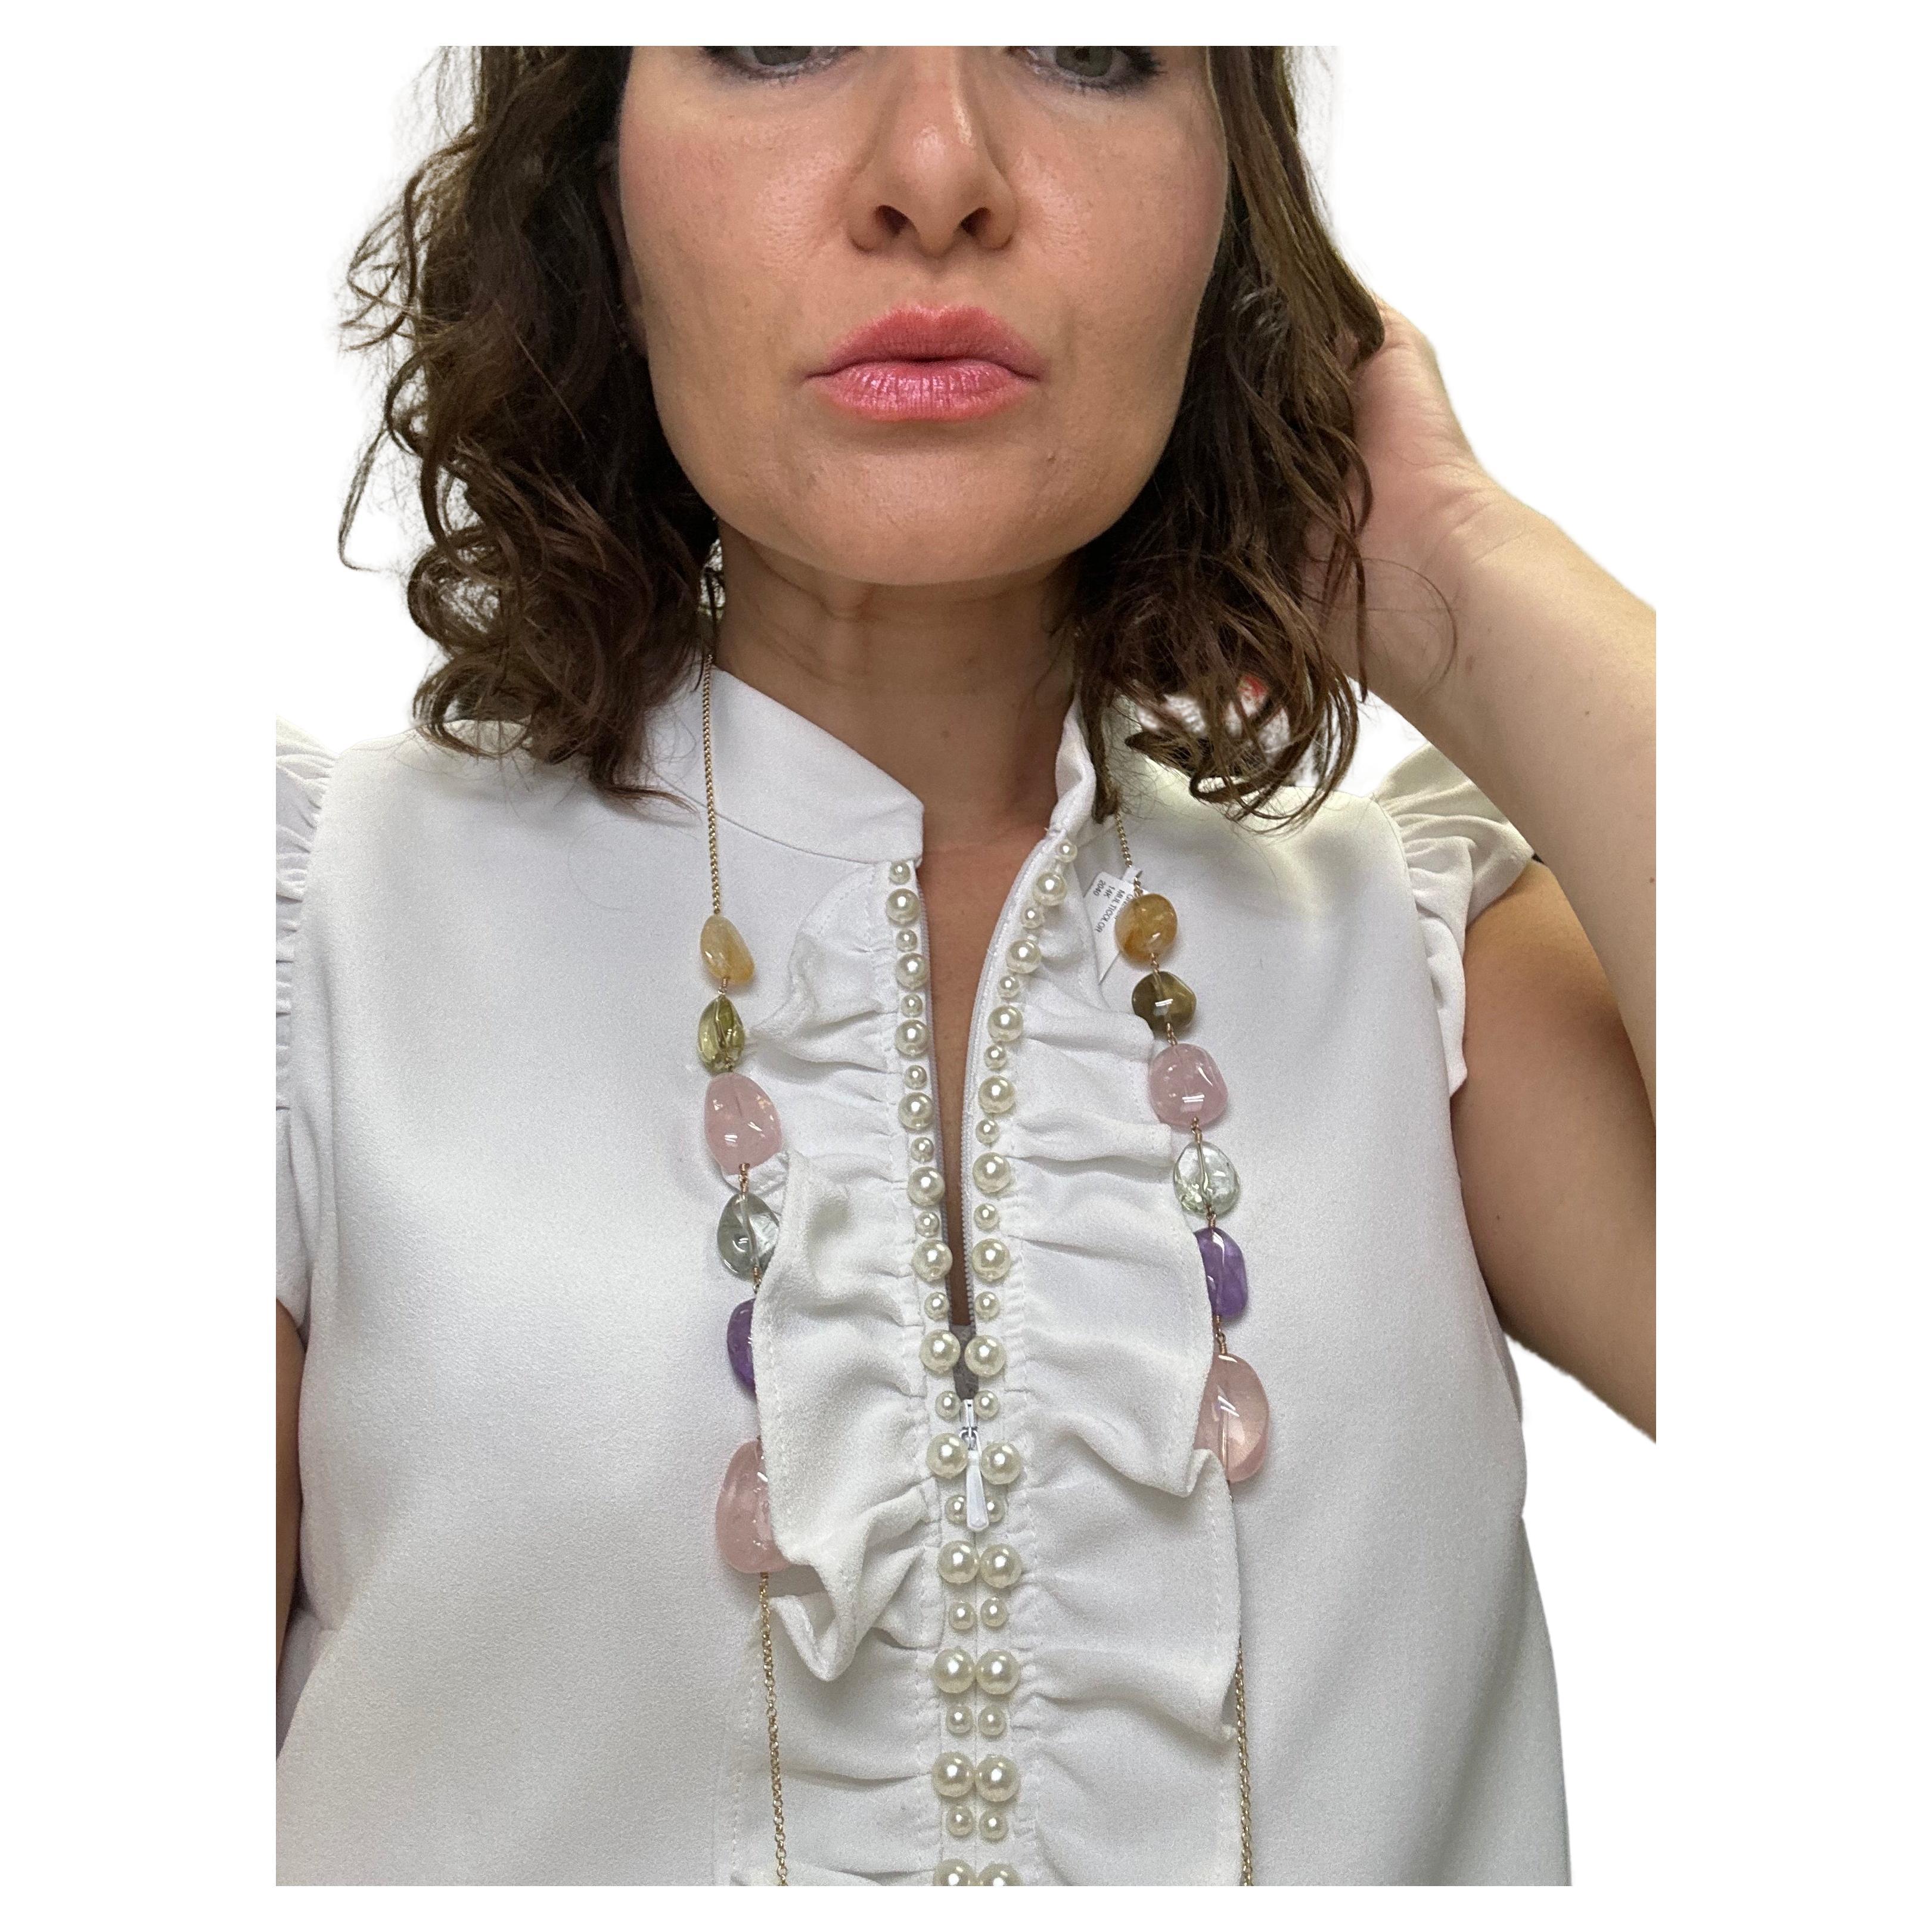 Stunning summer vibrant necklace with natural gemstones in 14KT yellow gold. Can be worn single or double strand.

Certificate of authenticity comes with purchase!

ABOUT US
We are a family-owned business. Our studio in located in the heart of Boca